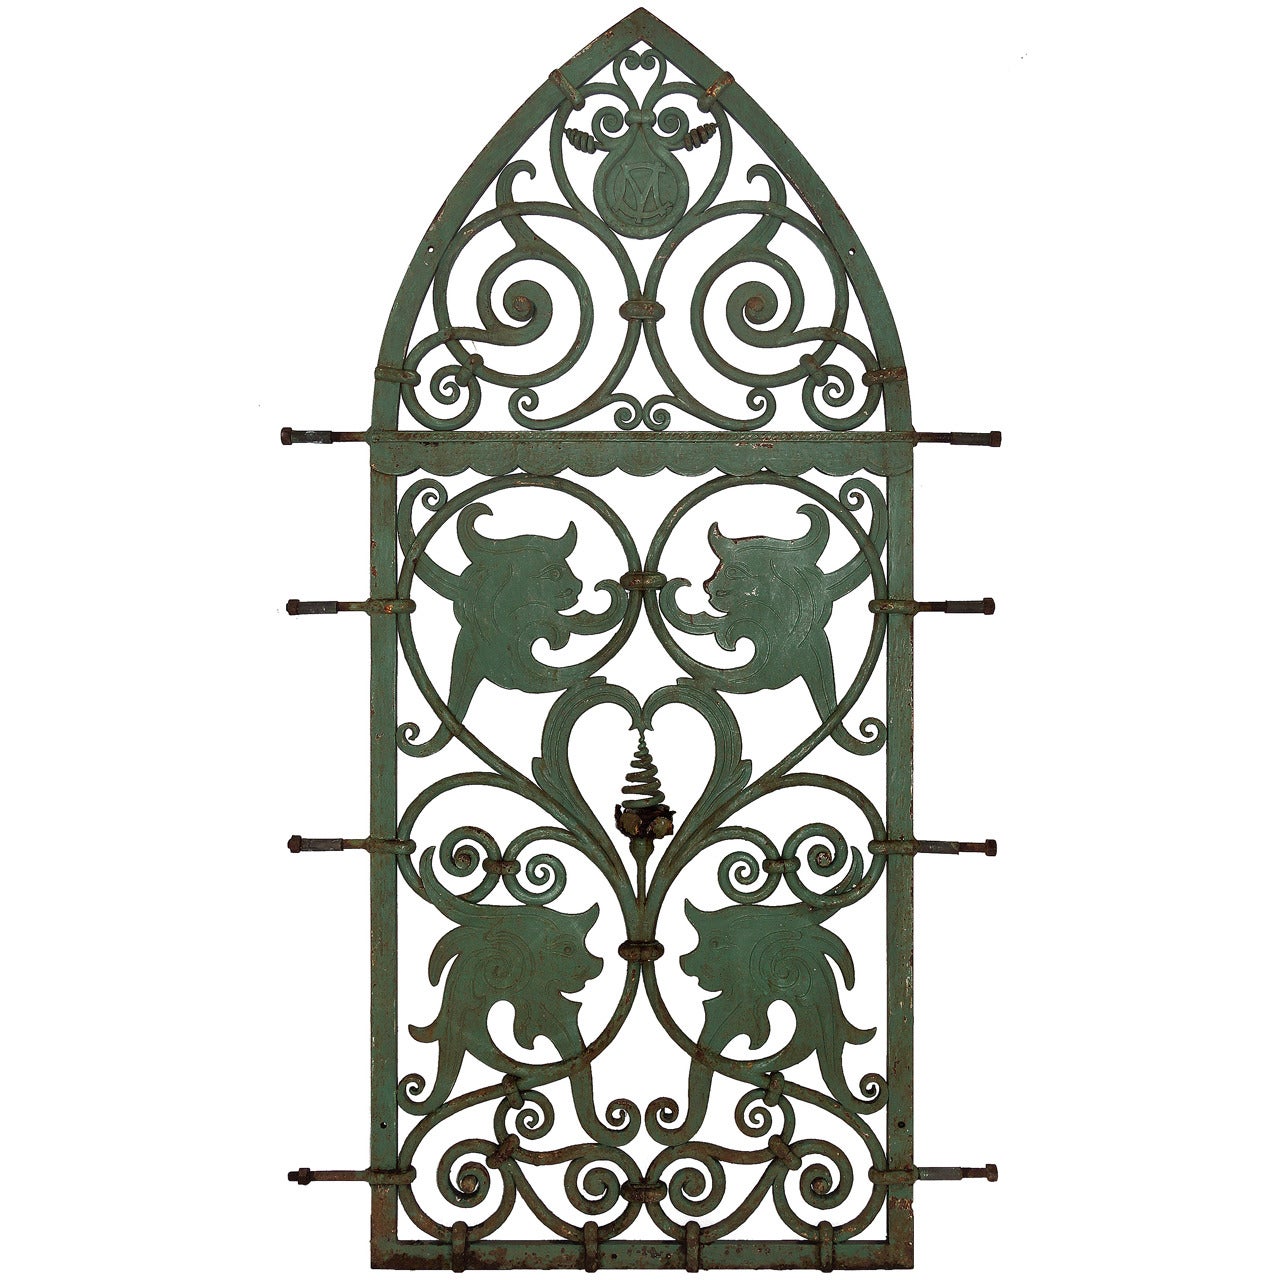 Highly Decorative Gothic Revival Window Guard Mascarons For Sale